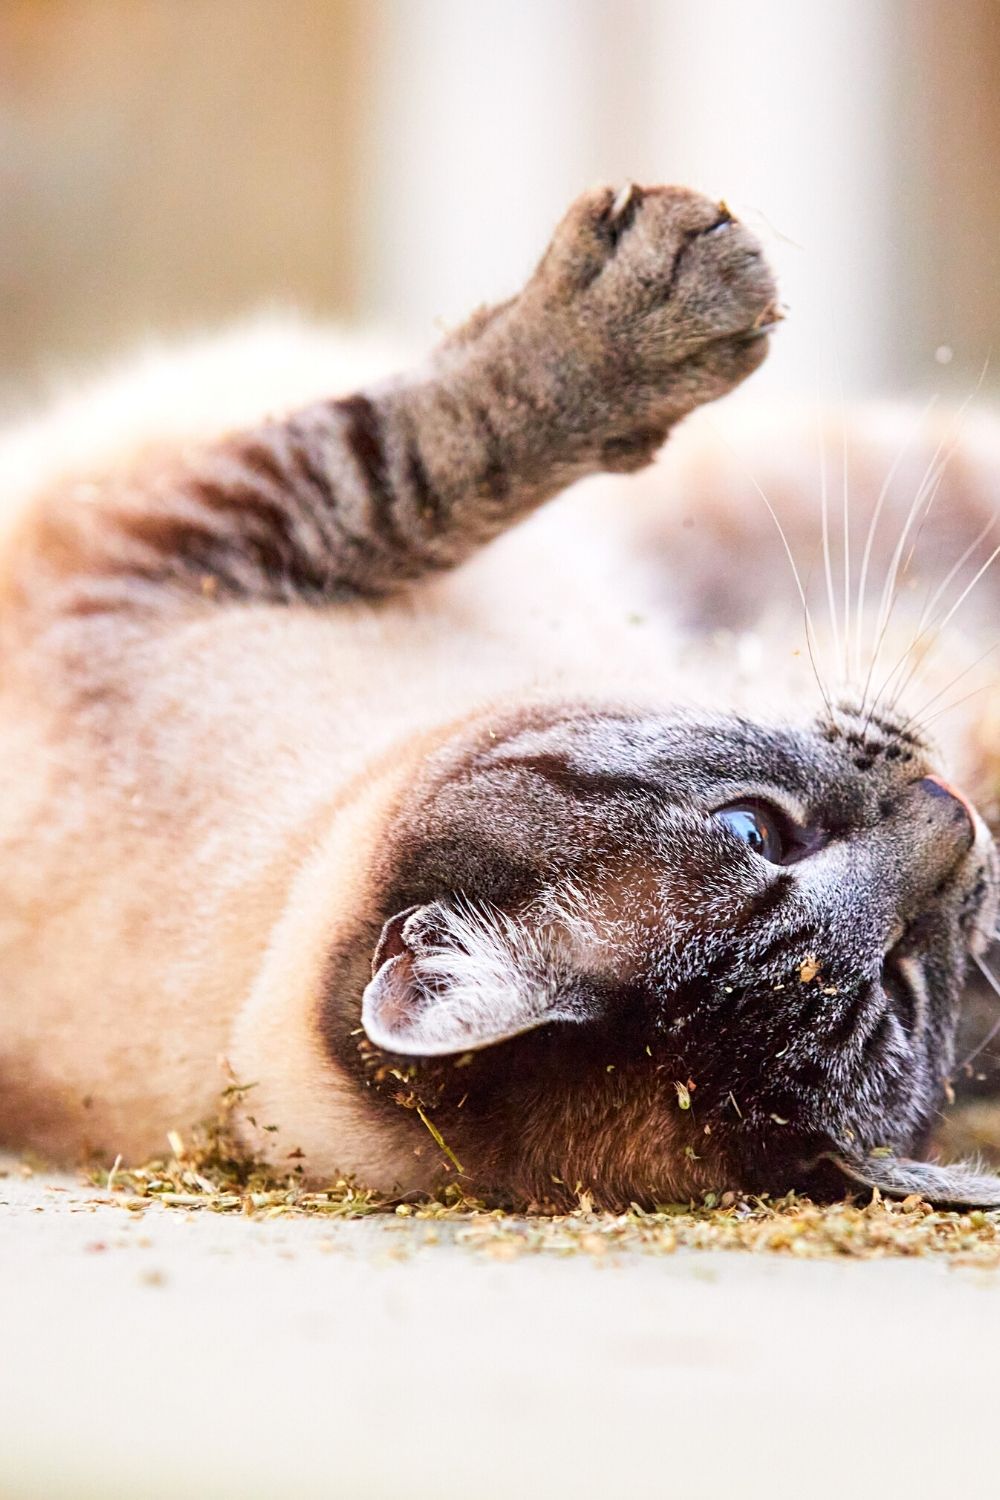 Rolling in the dirt is a surprising effect of catnip on felines